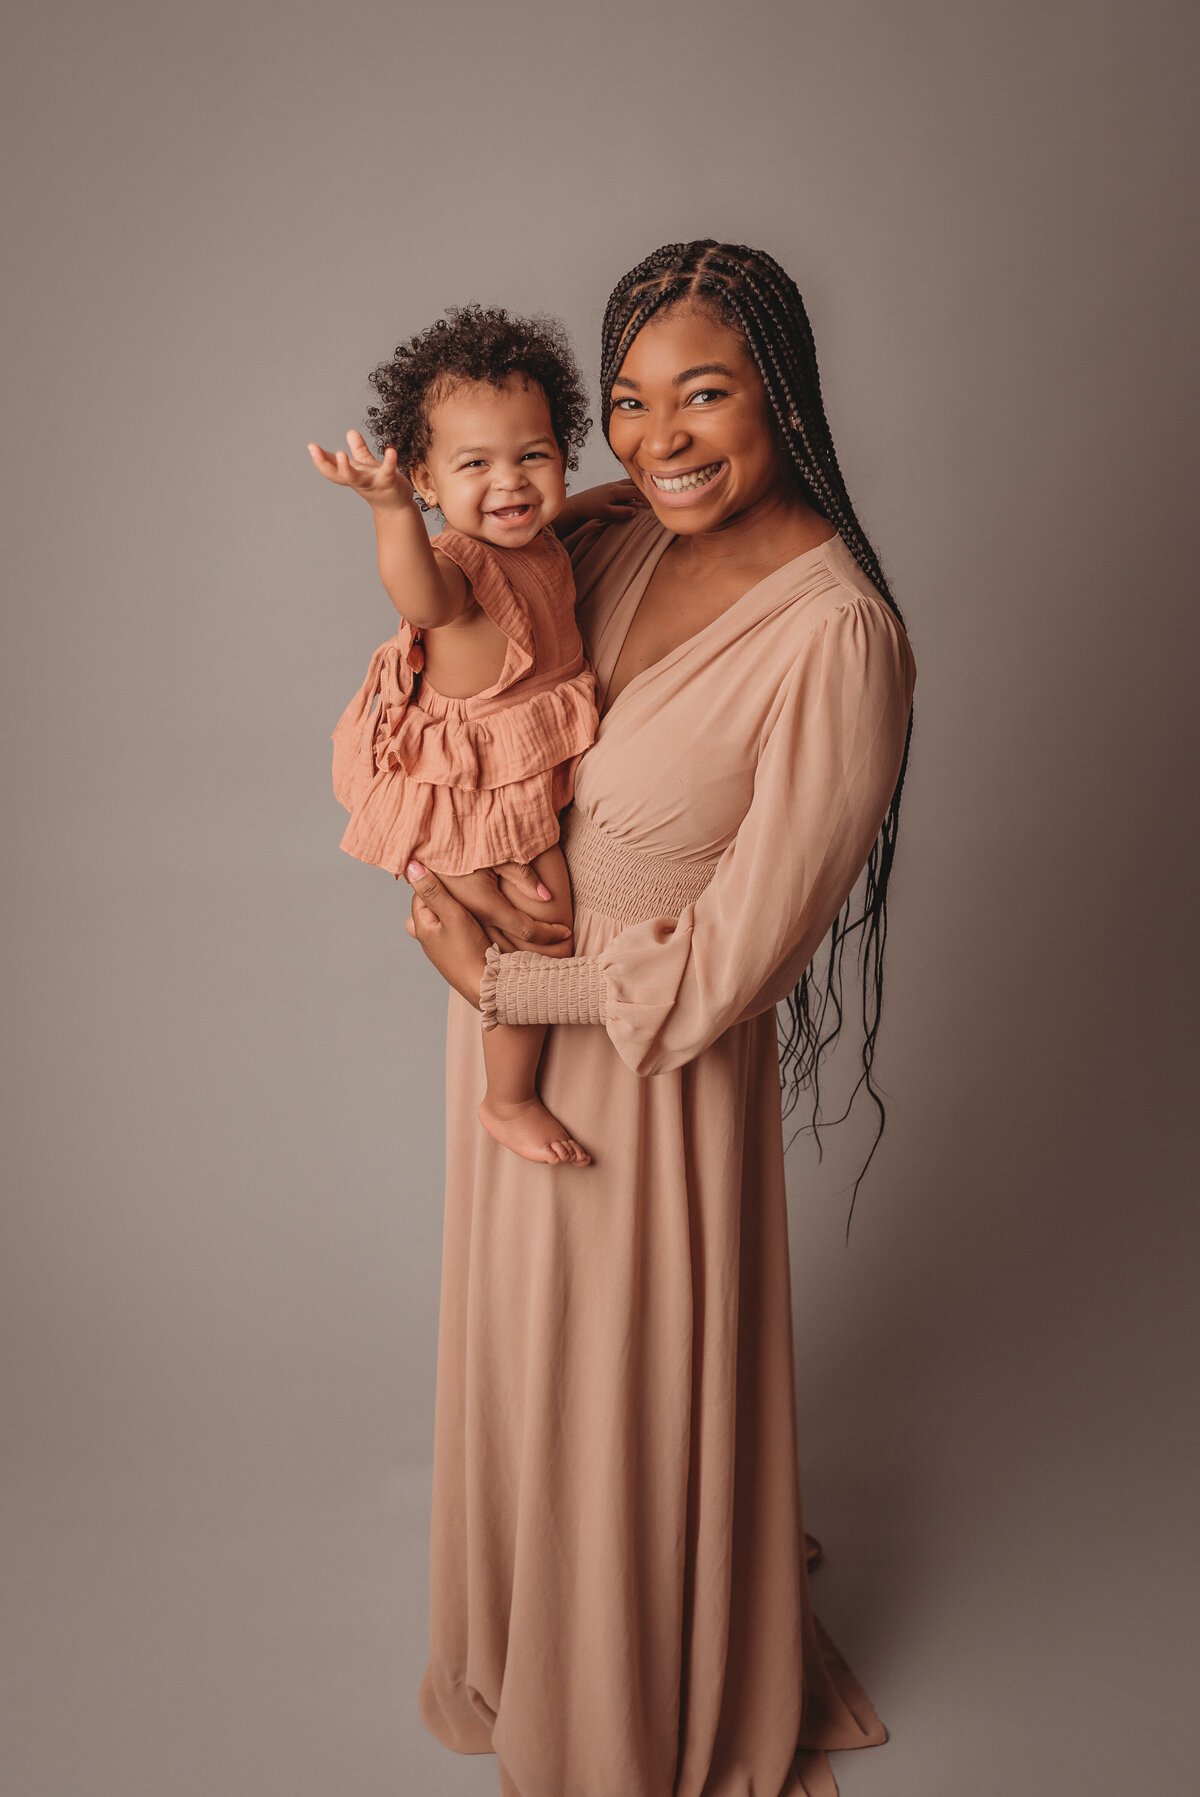 Family portrait on light grey backdrop with mom holding one year old baby girl and they are smiling at camera, wearing nude pink and creams